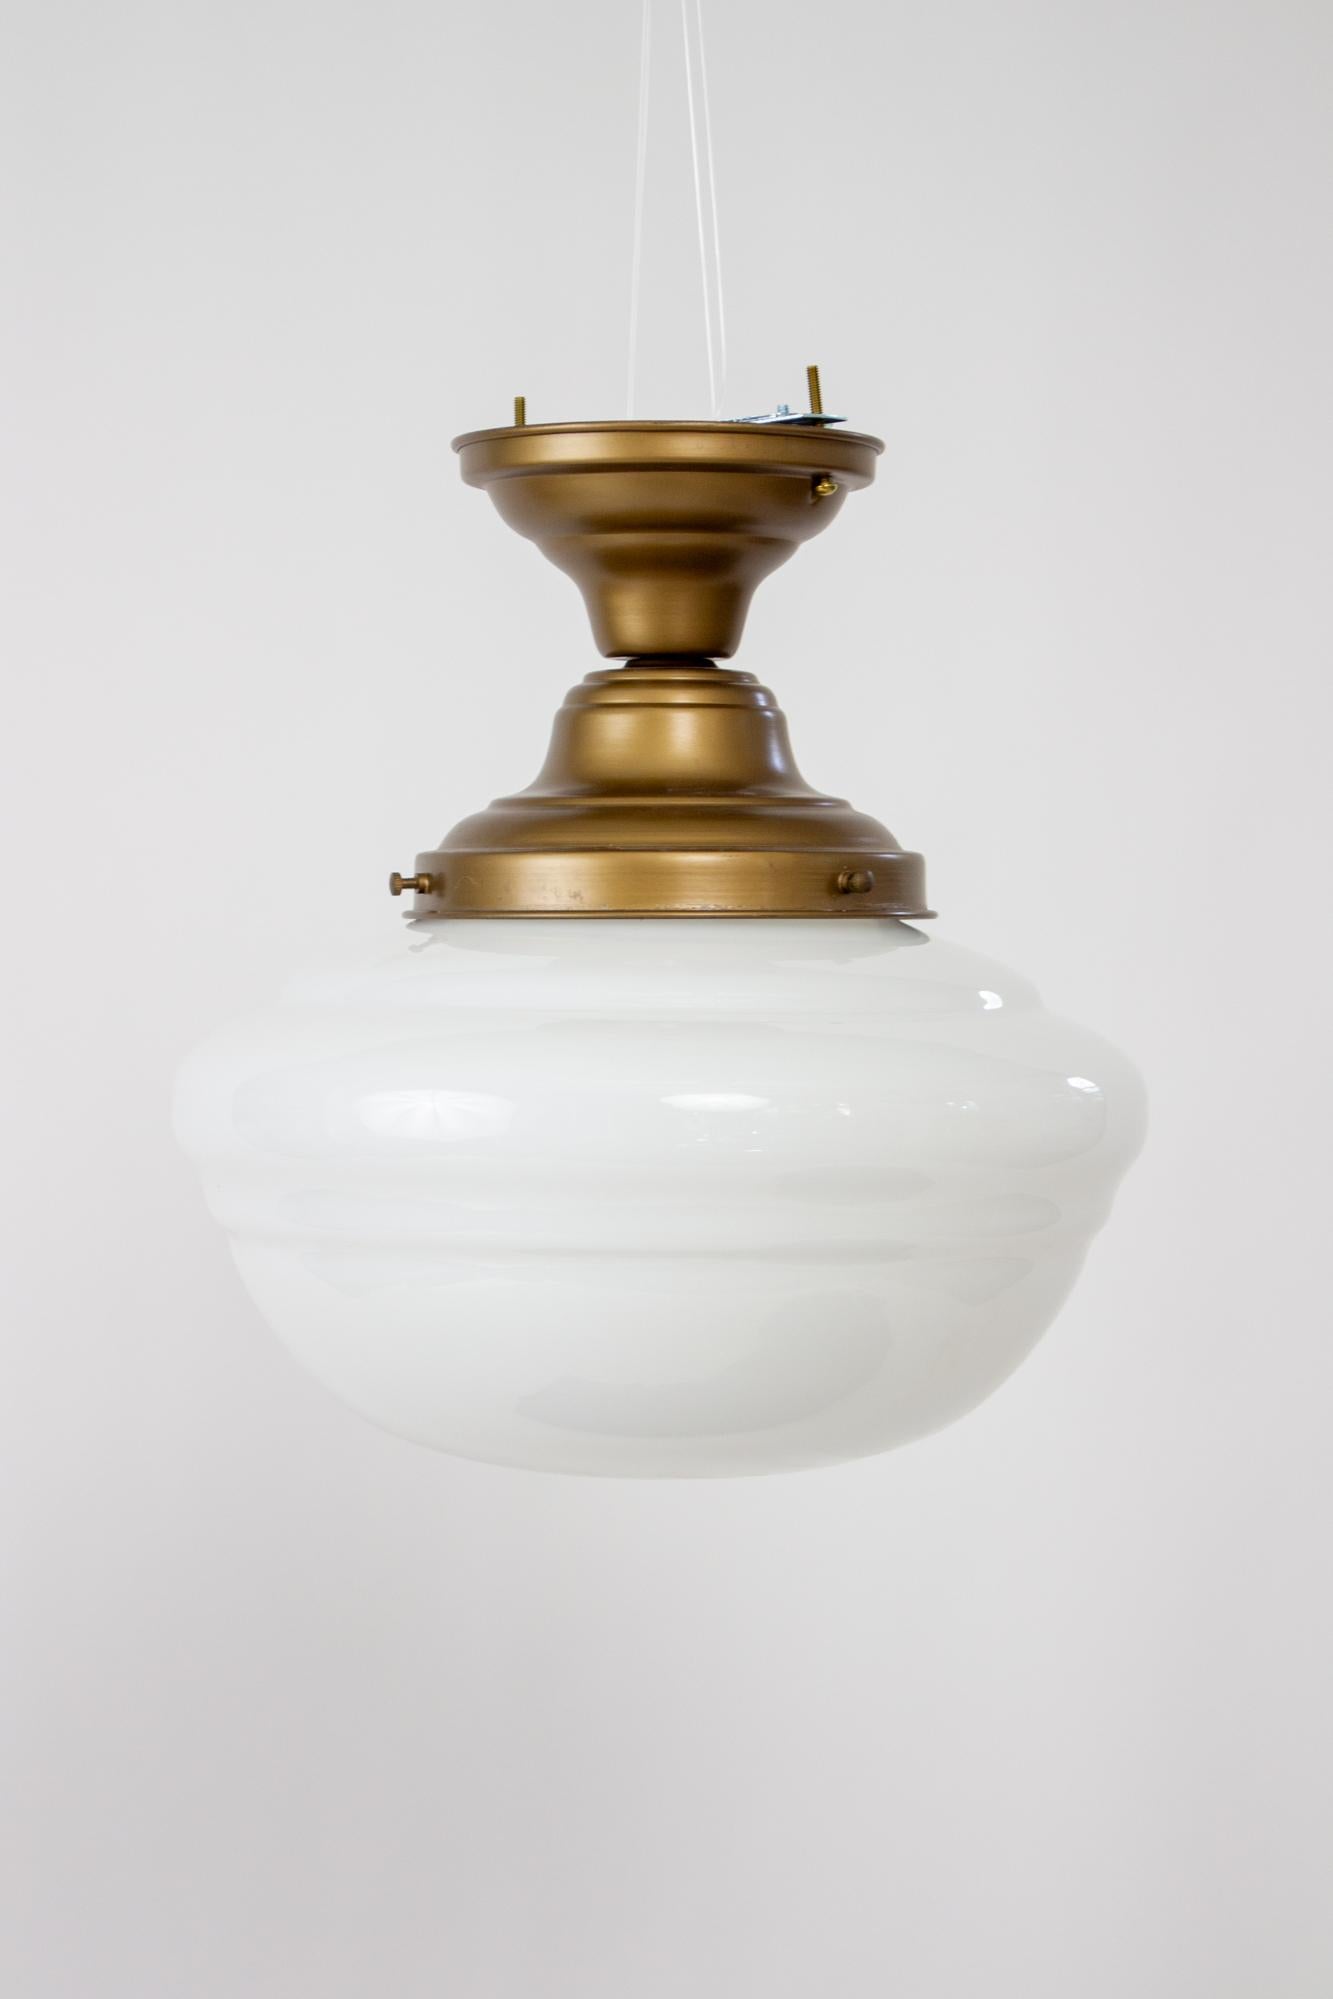 1930’s schoolhouse milk glass flush mount fixture. Glass is a Traditional schoolhouse glass shade. Mounted on a new fixture, satin antique brass finish , UL listed, with porcelain sockets. Excellent for a hallway or ceiling, and with a height of